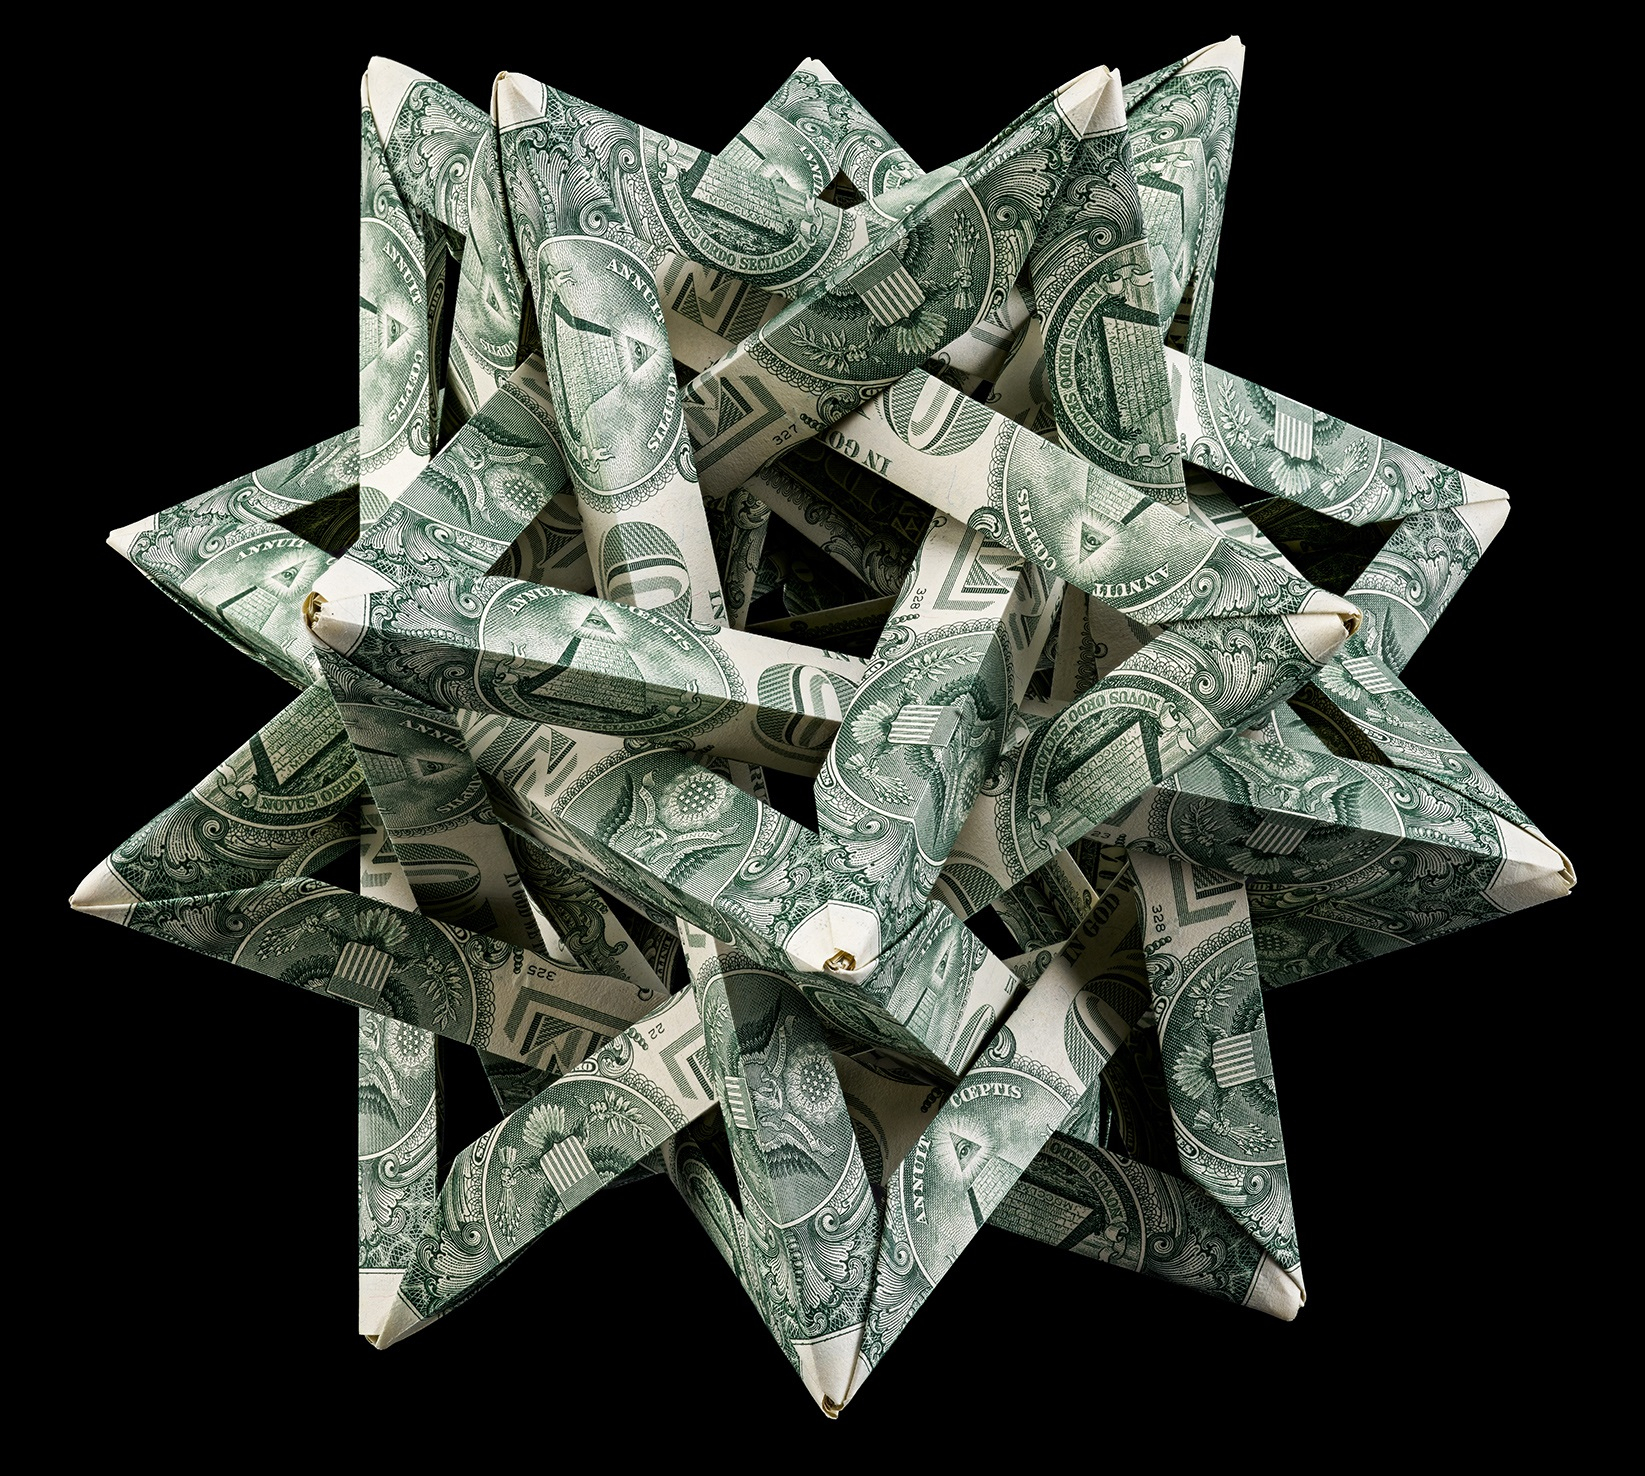 Dollar Bill Origami Shirt With Tie Art From Money Paper Money Origami National Museum Of American